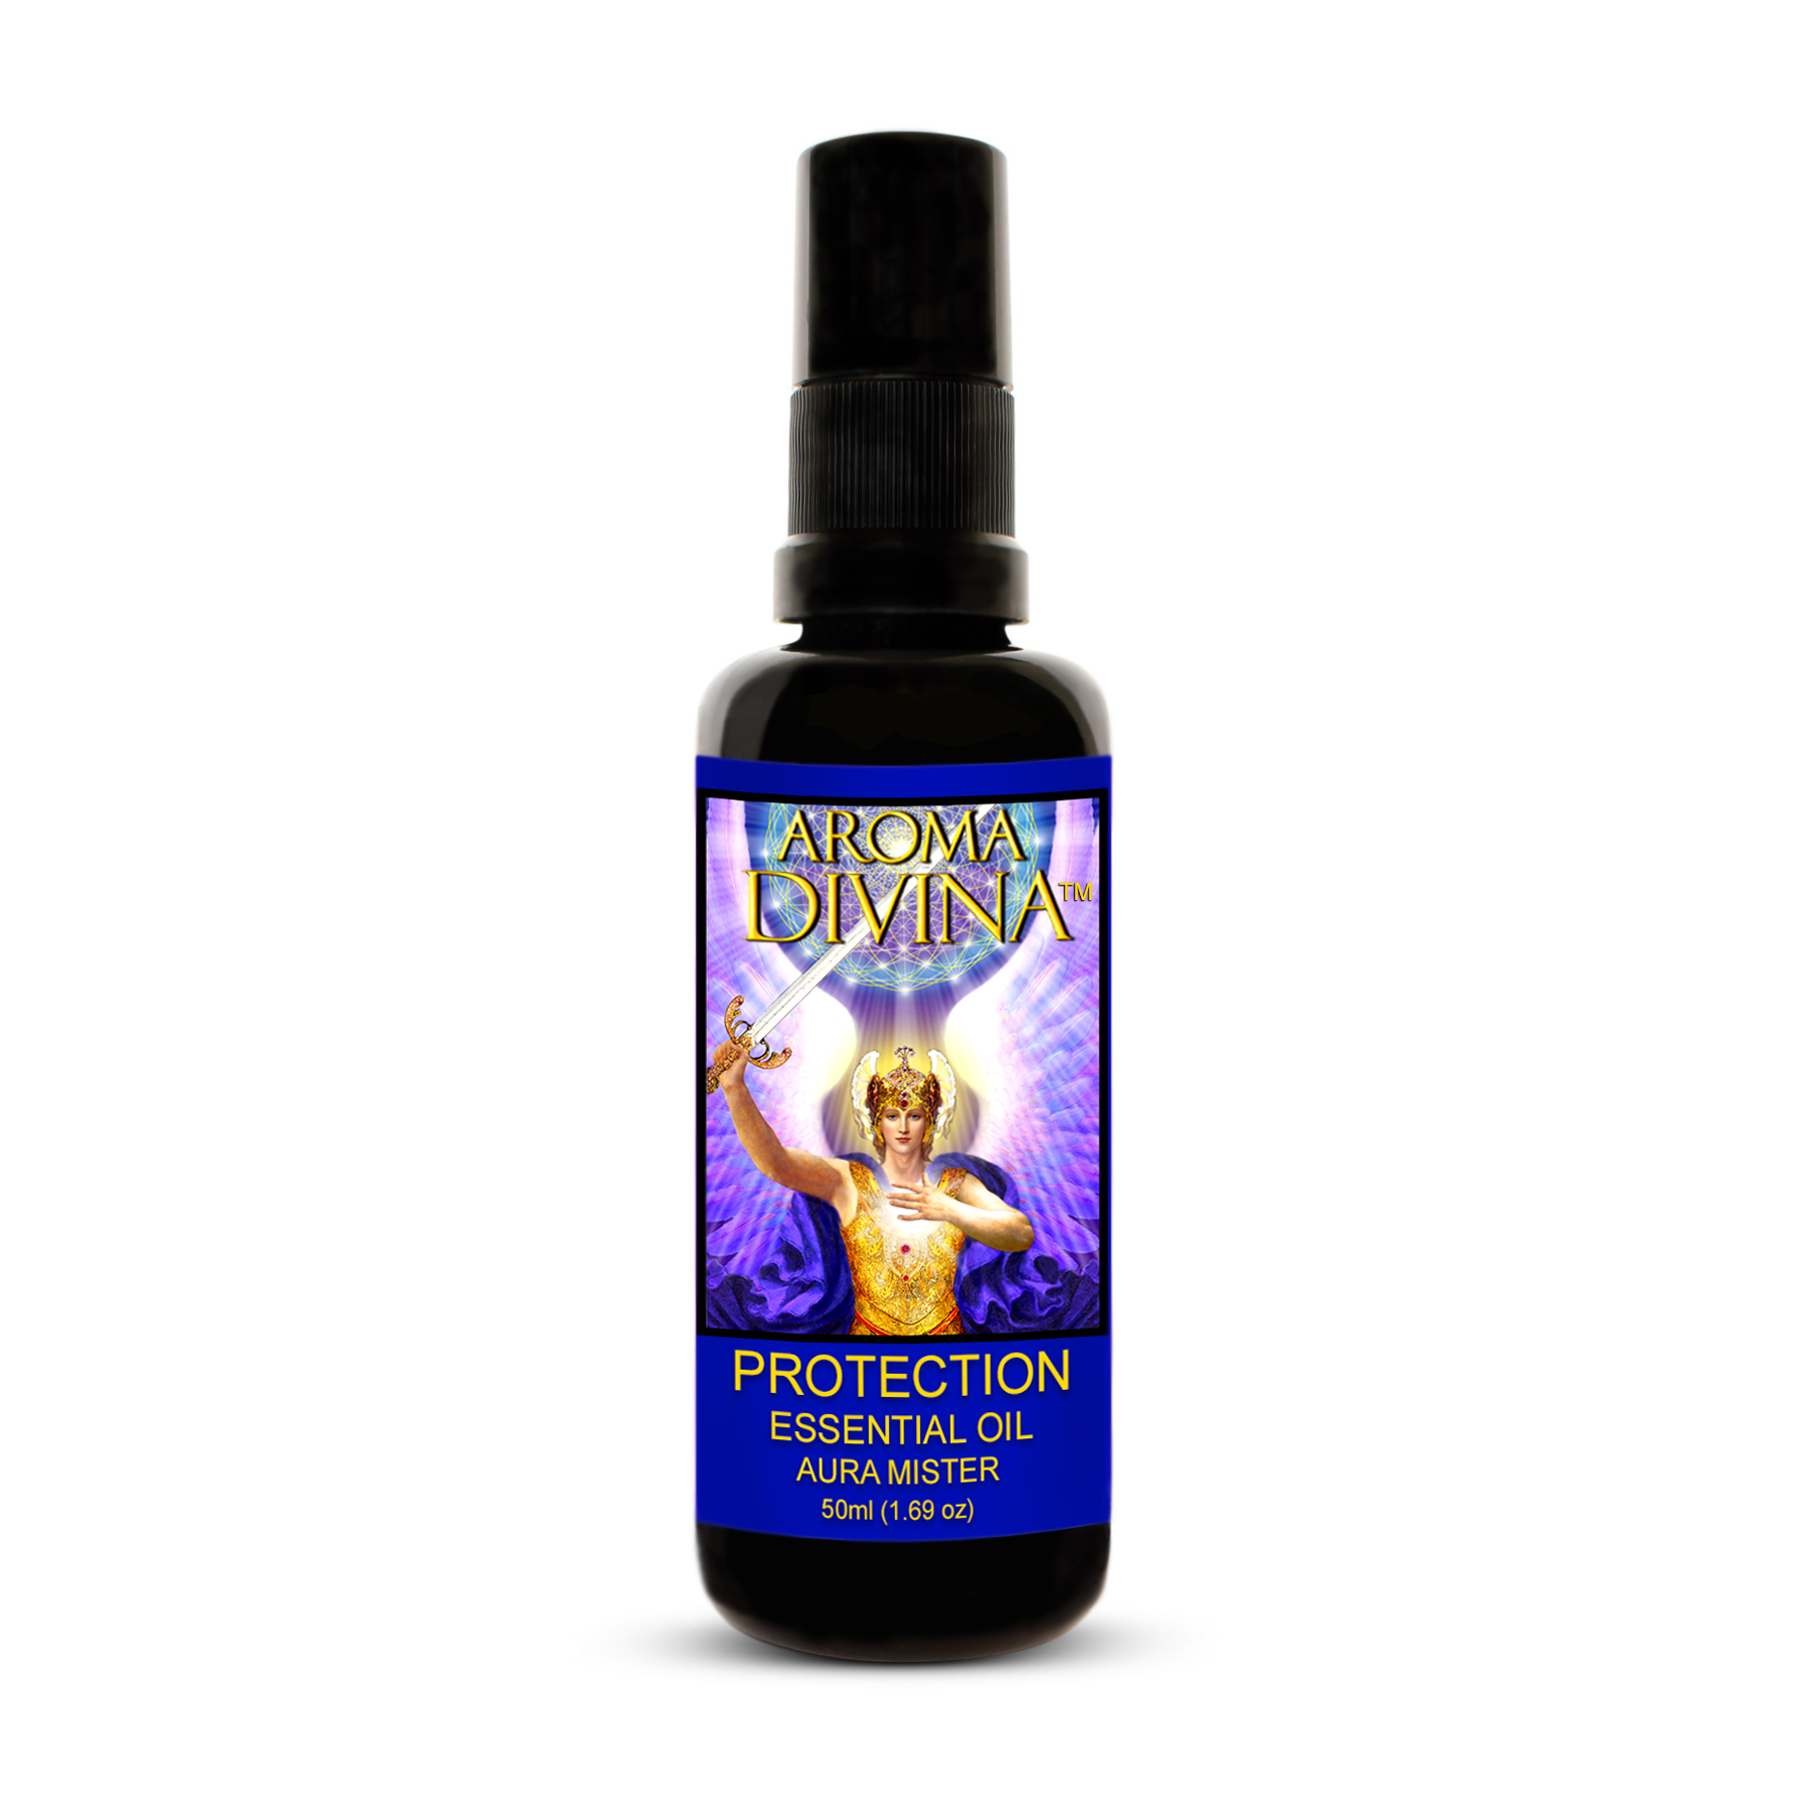 Protection - Essential Oil Mister 50ml